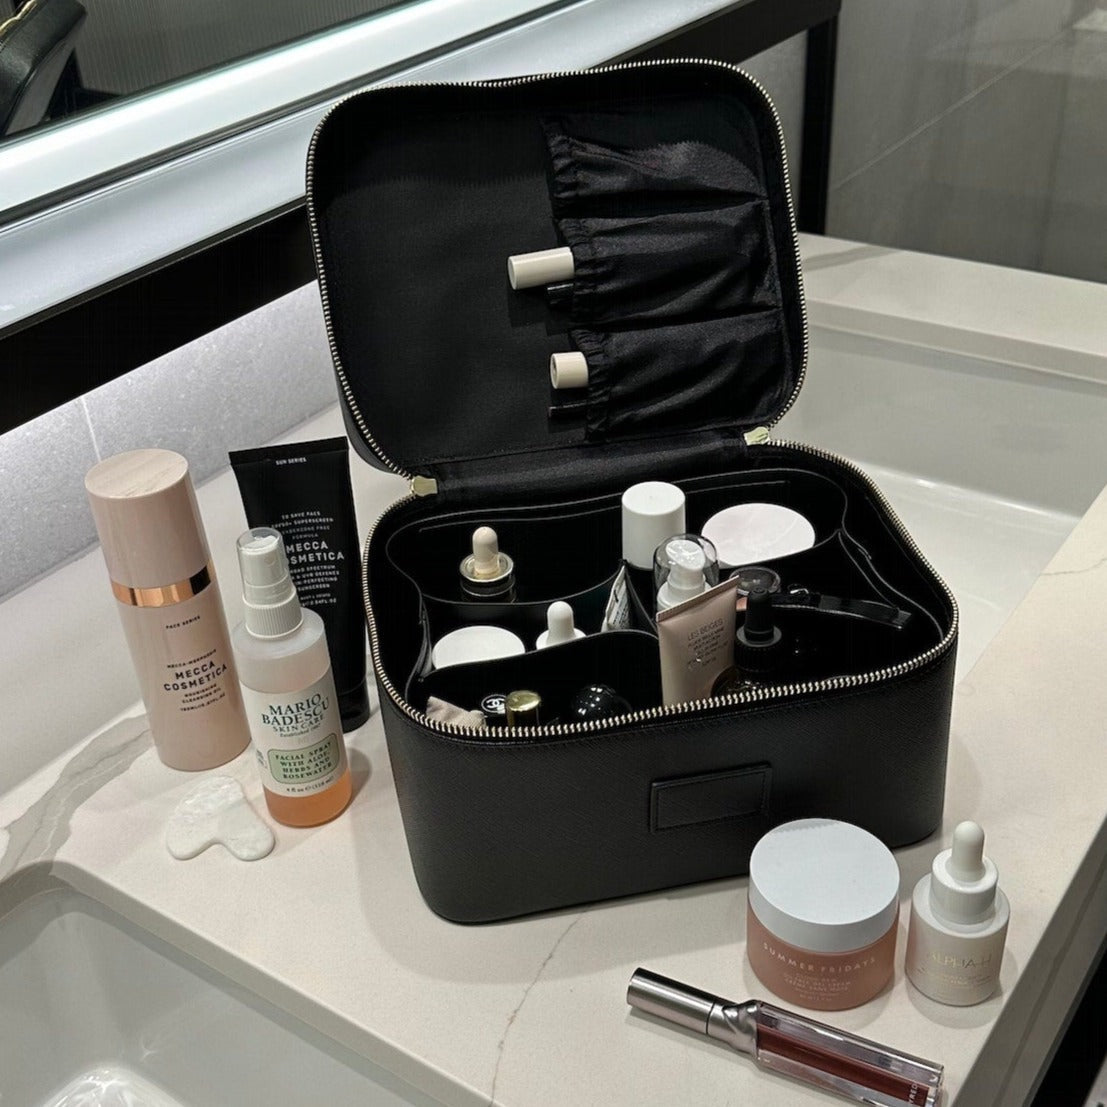 Getting ready becomes mess-free with the Vanity Case.